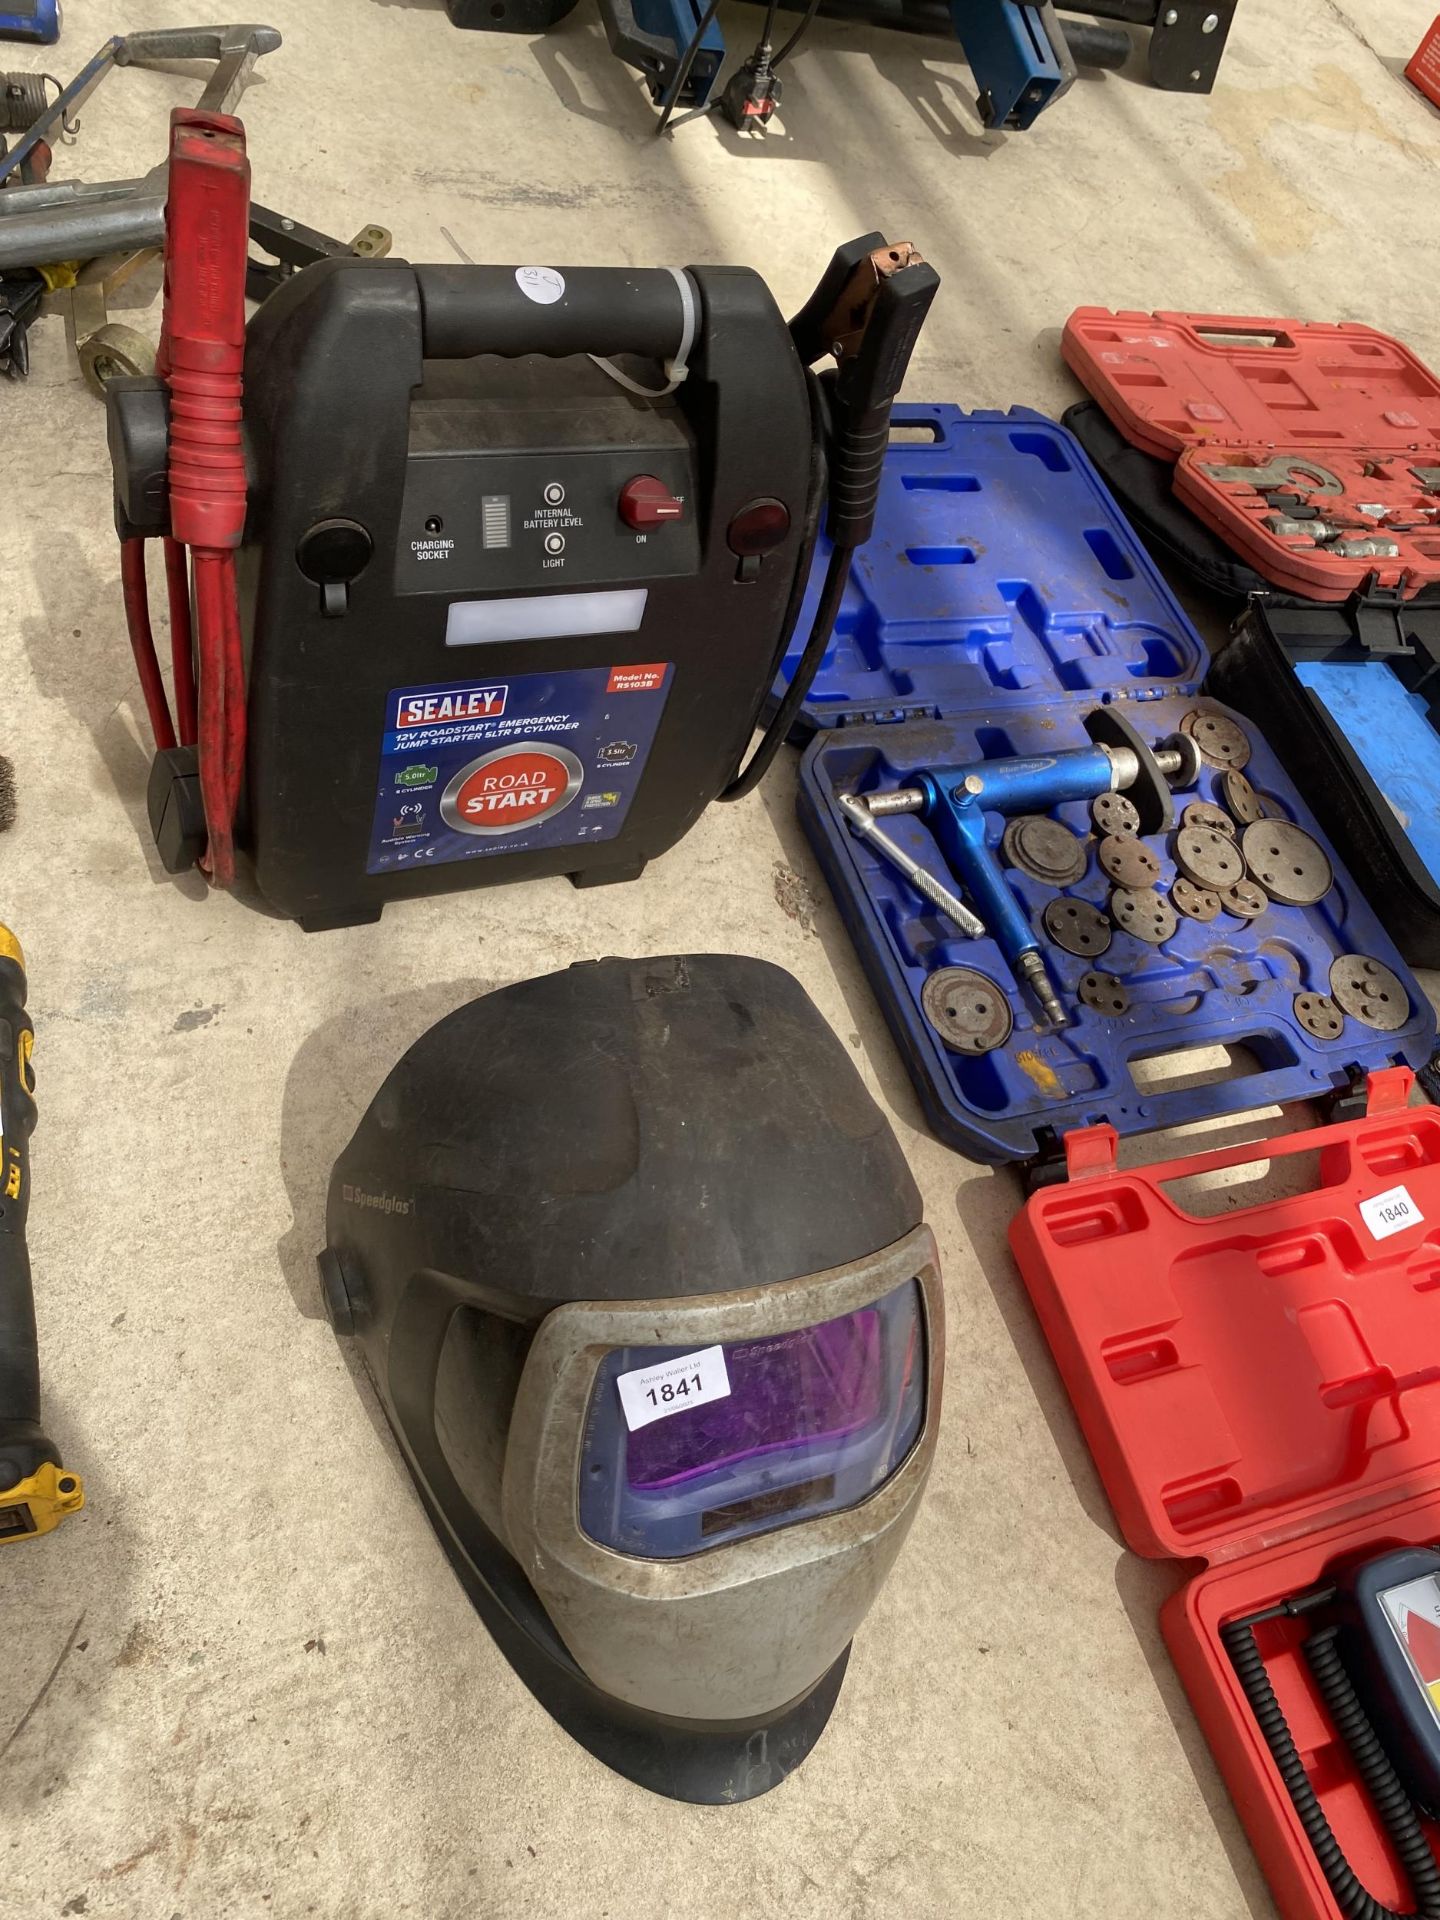 A SEALEY BATTERY JUMP STARTER AND A WELDING MASK